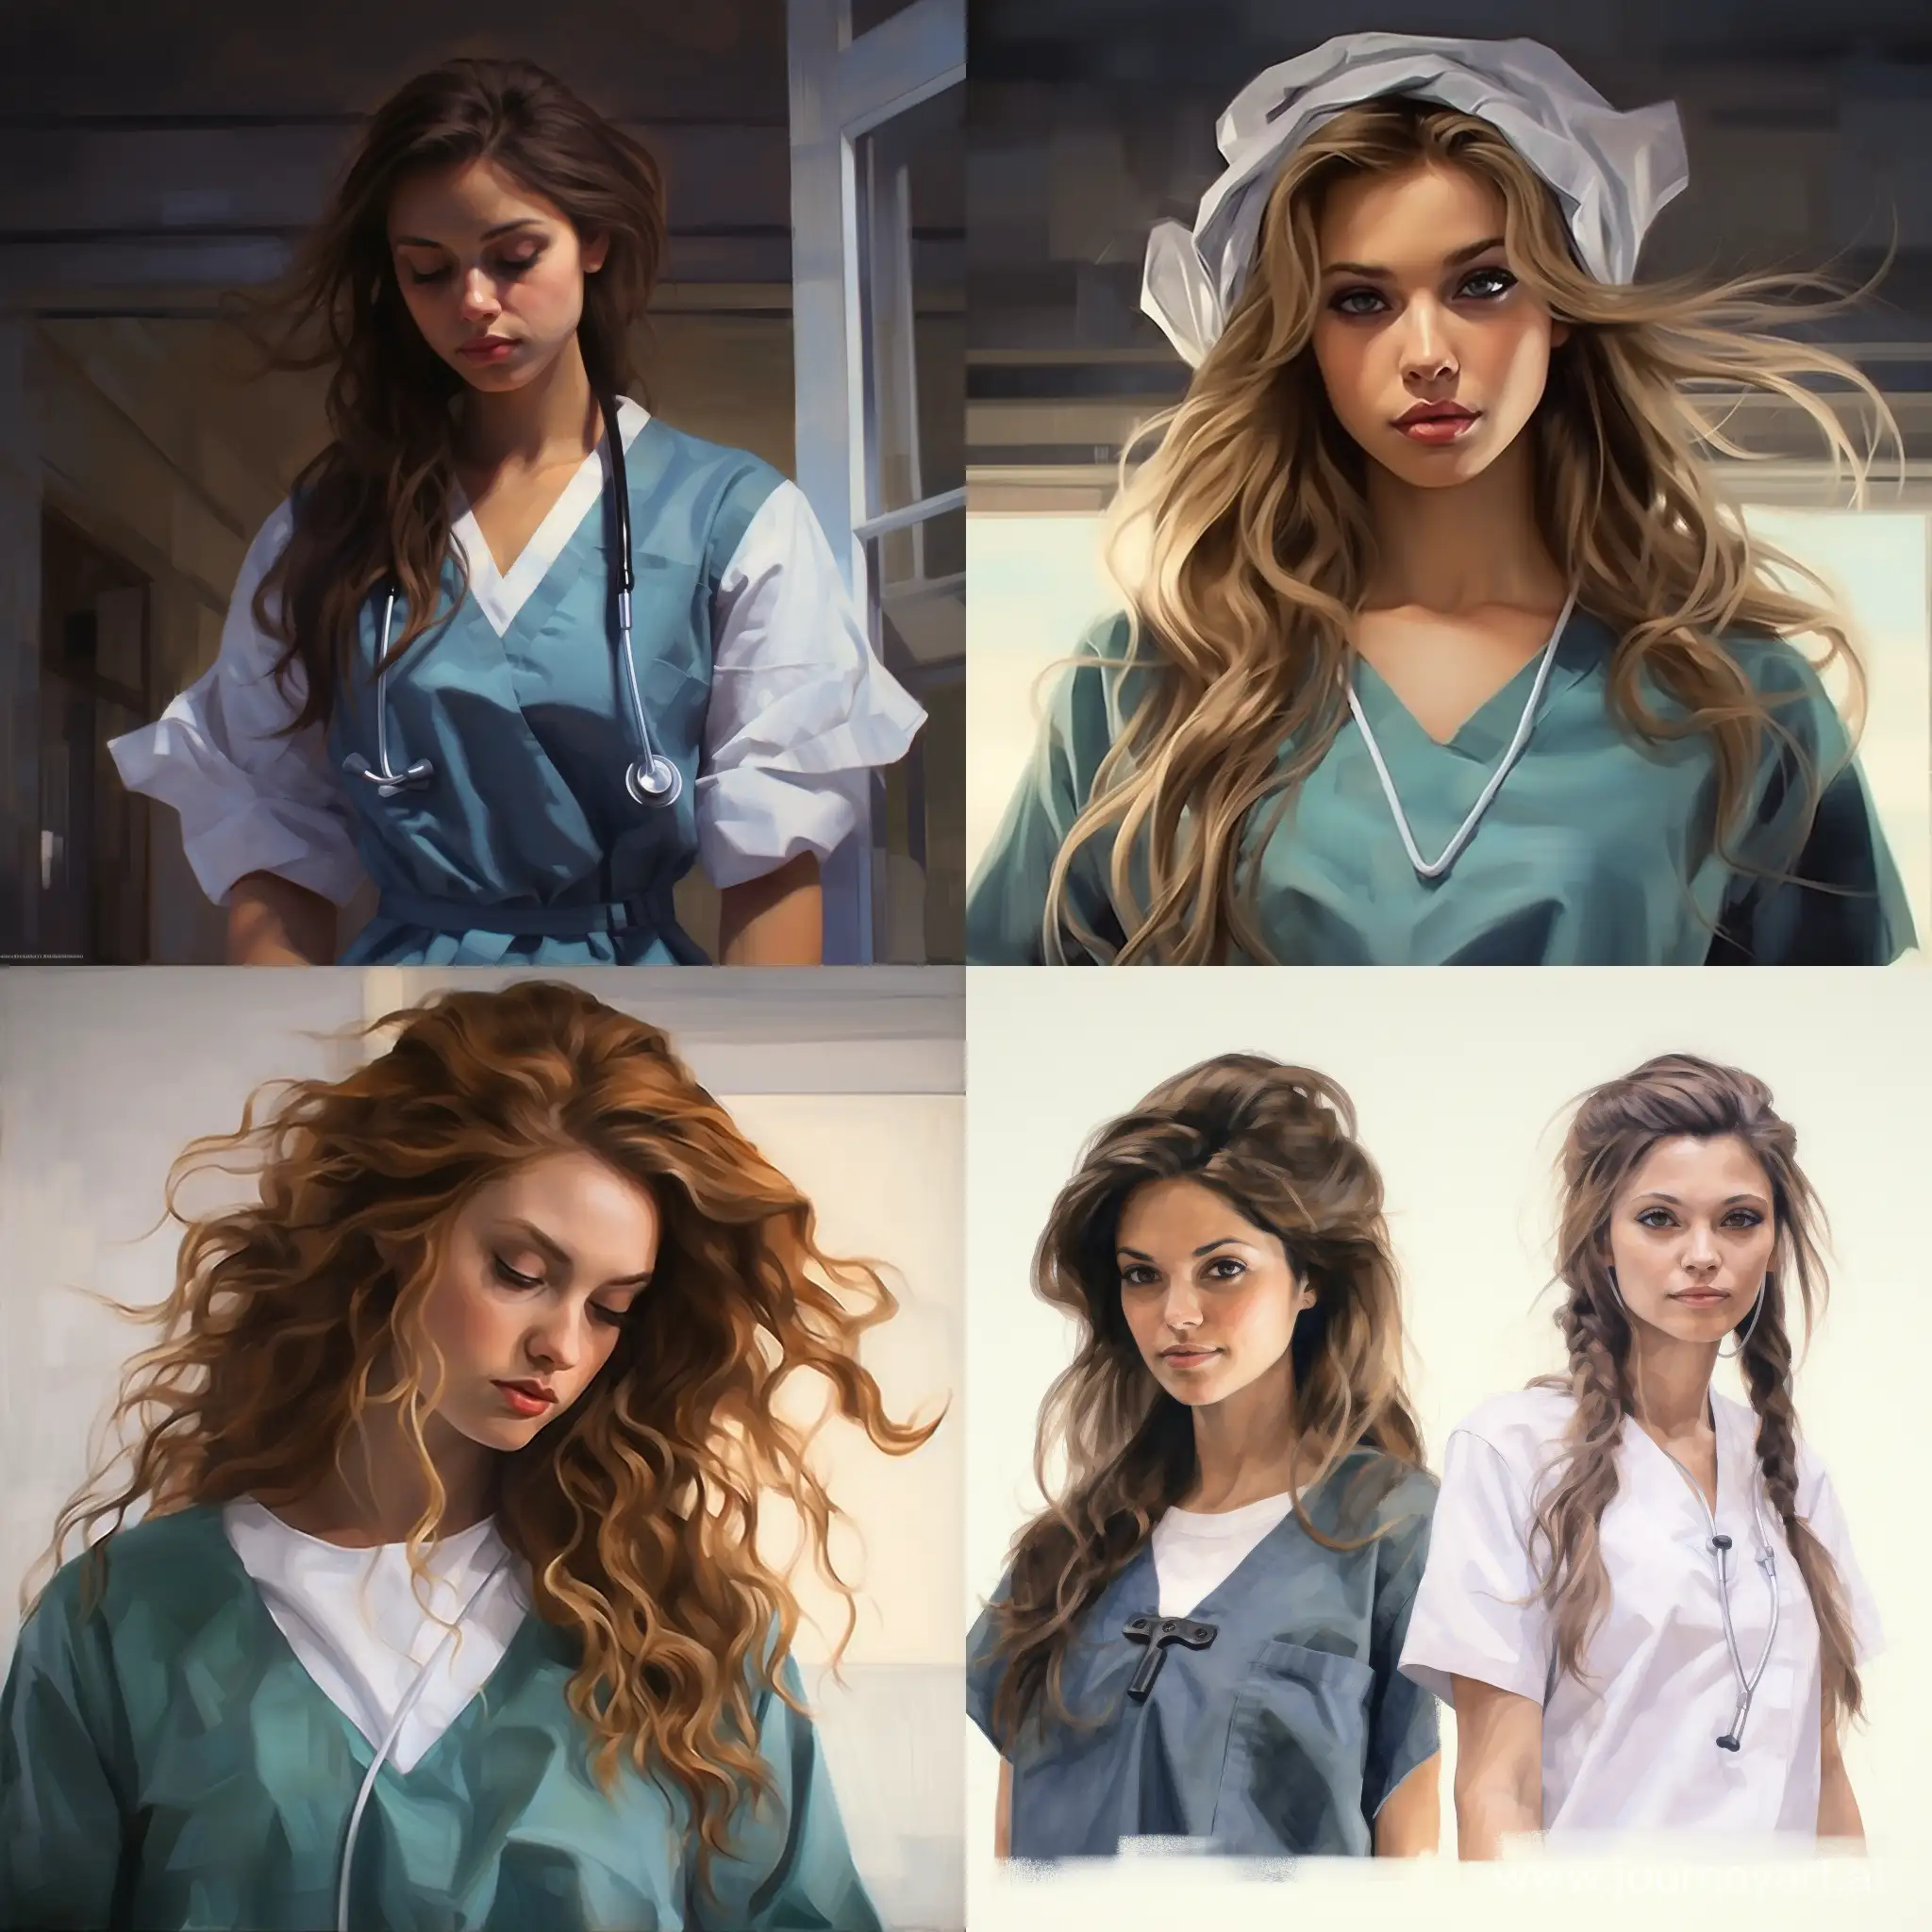 I want pictures of doctors and if they are female , they should cover their hair with clothes. 
